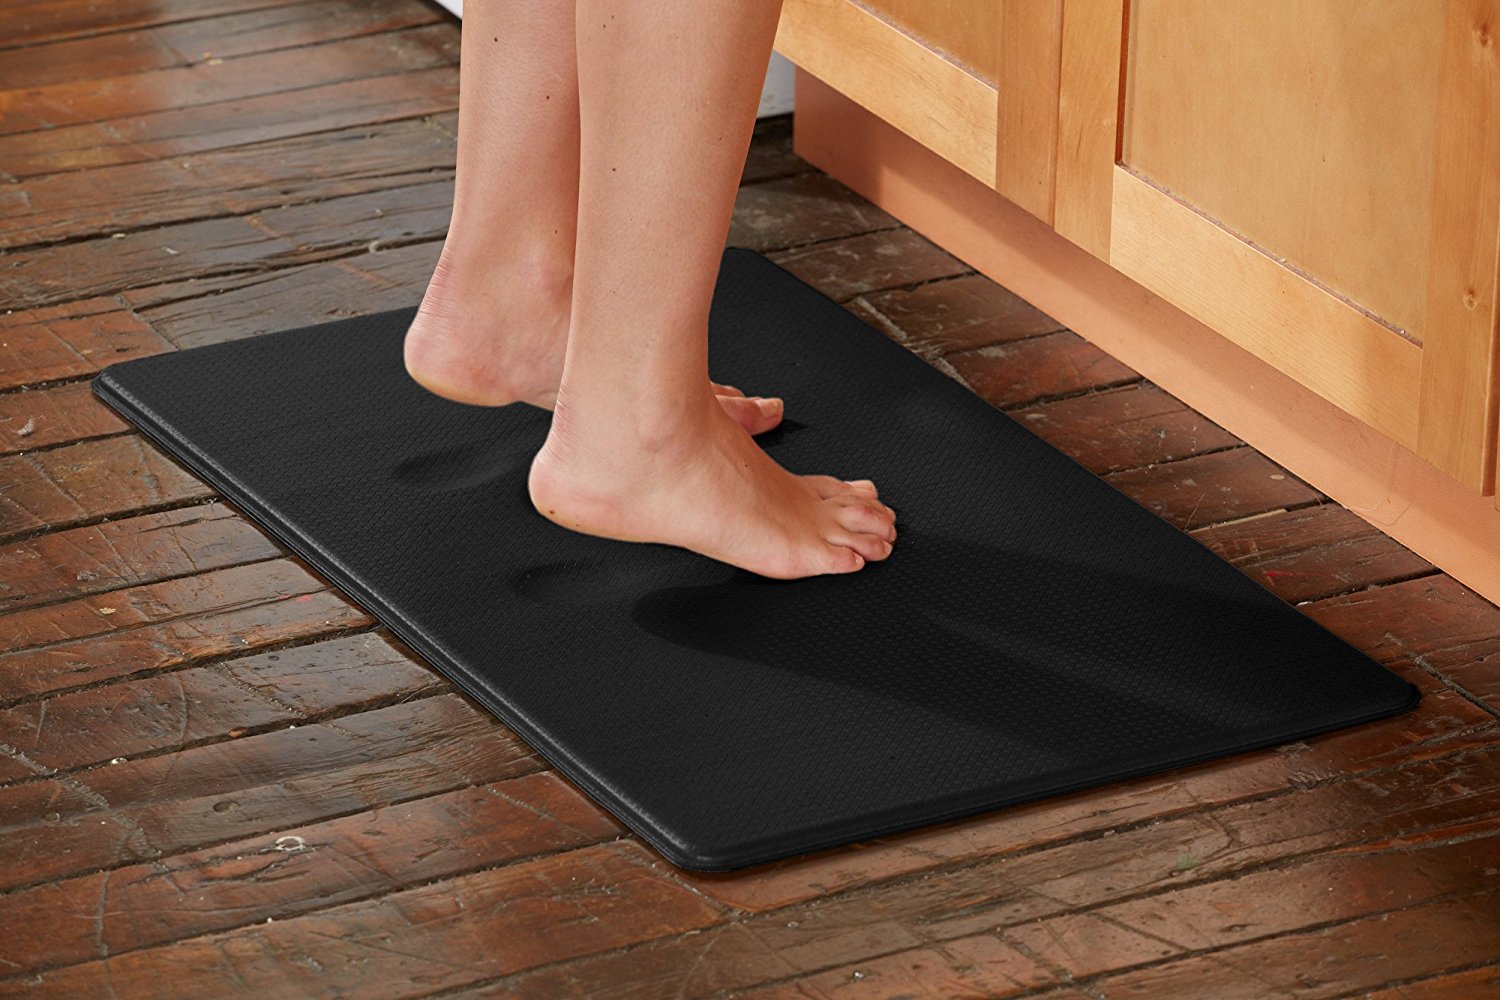 Art3d 18" X 30" Premium All-Purpose Non-Slip Anti-Fatigue Kitchen Standing Rug, Comfort Mat with Extra Support and Thick in Black - image 5 of 7